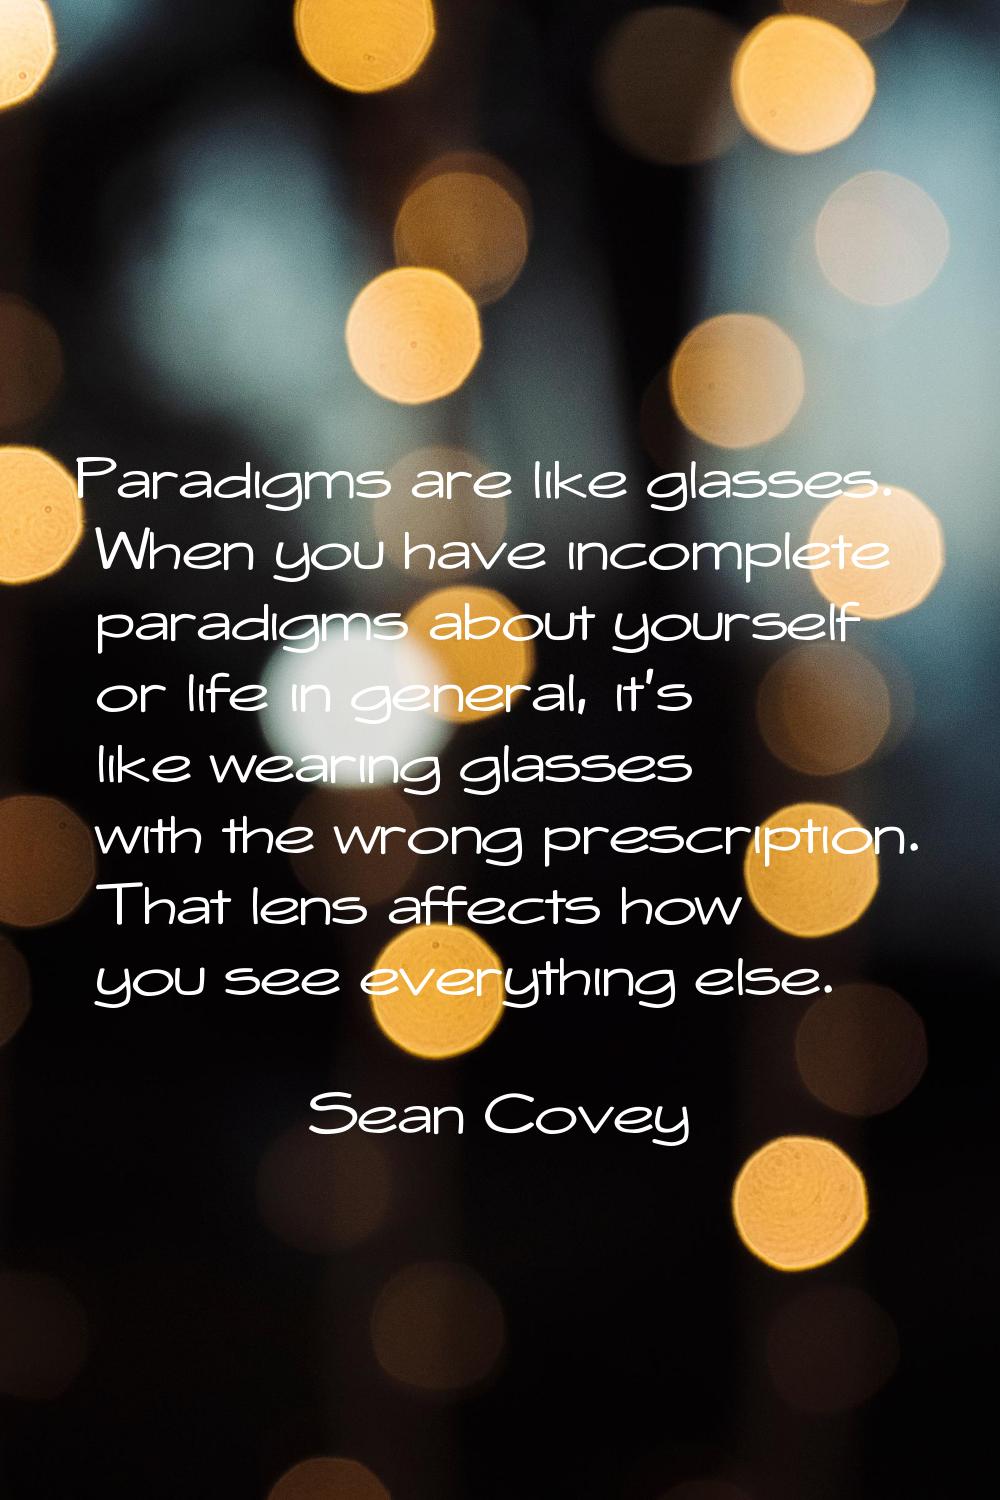 Paradigms are like glasses. When you have incomplete paradigms about yourself or life in general, i